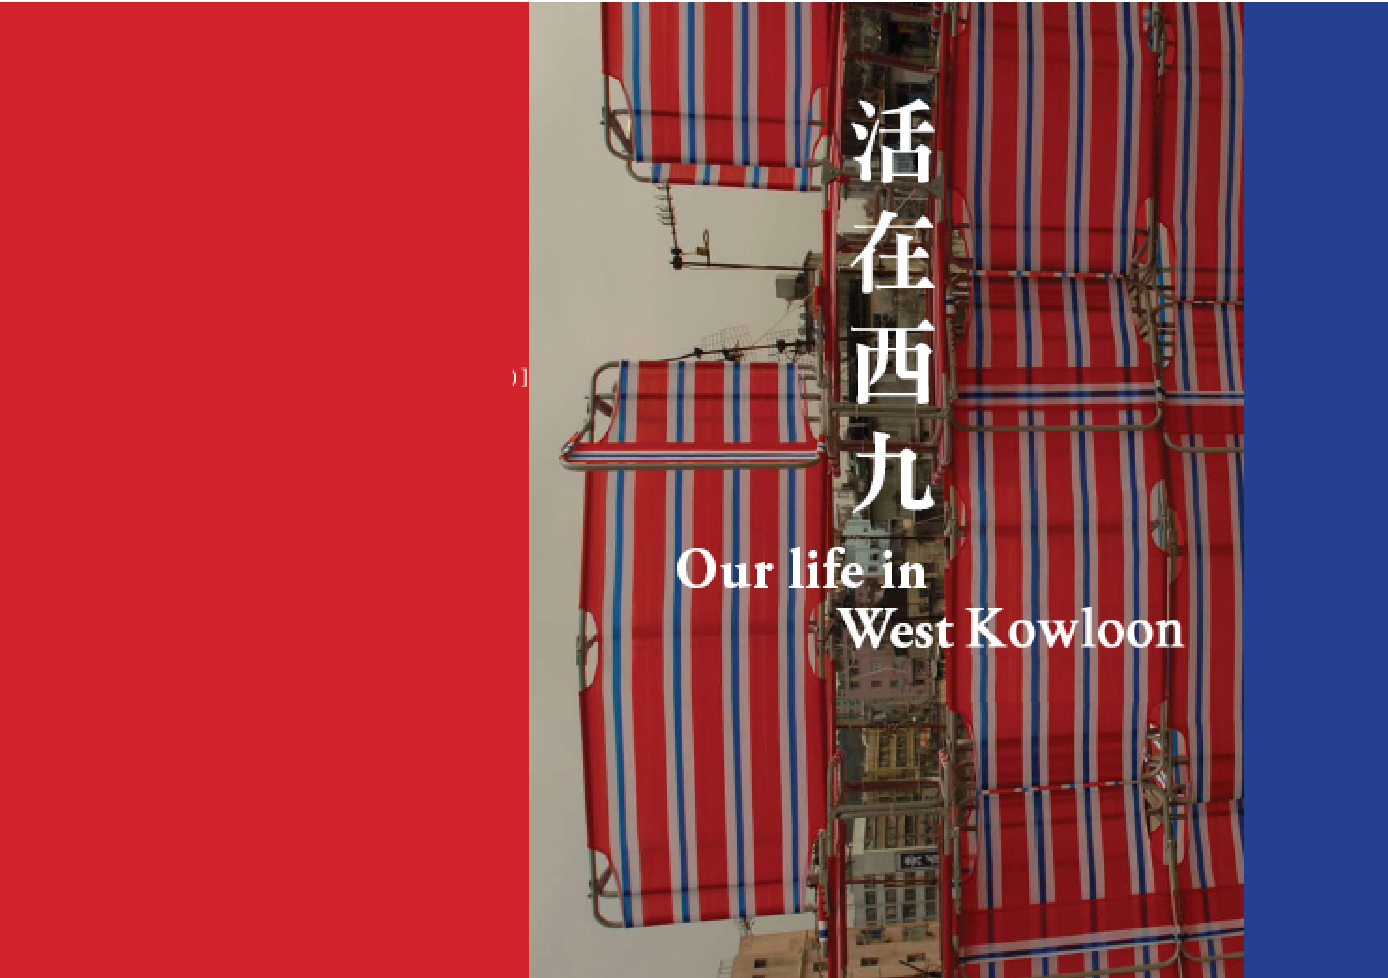 Our Life in West Kowloon